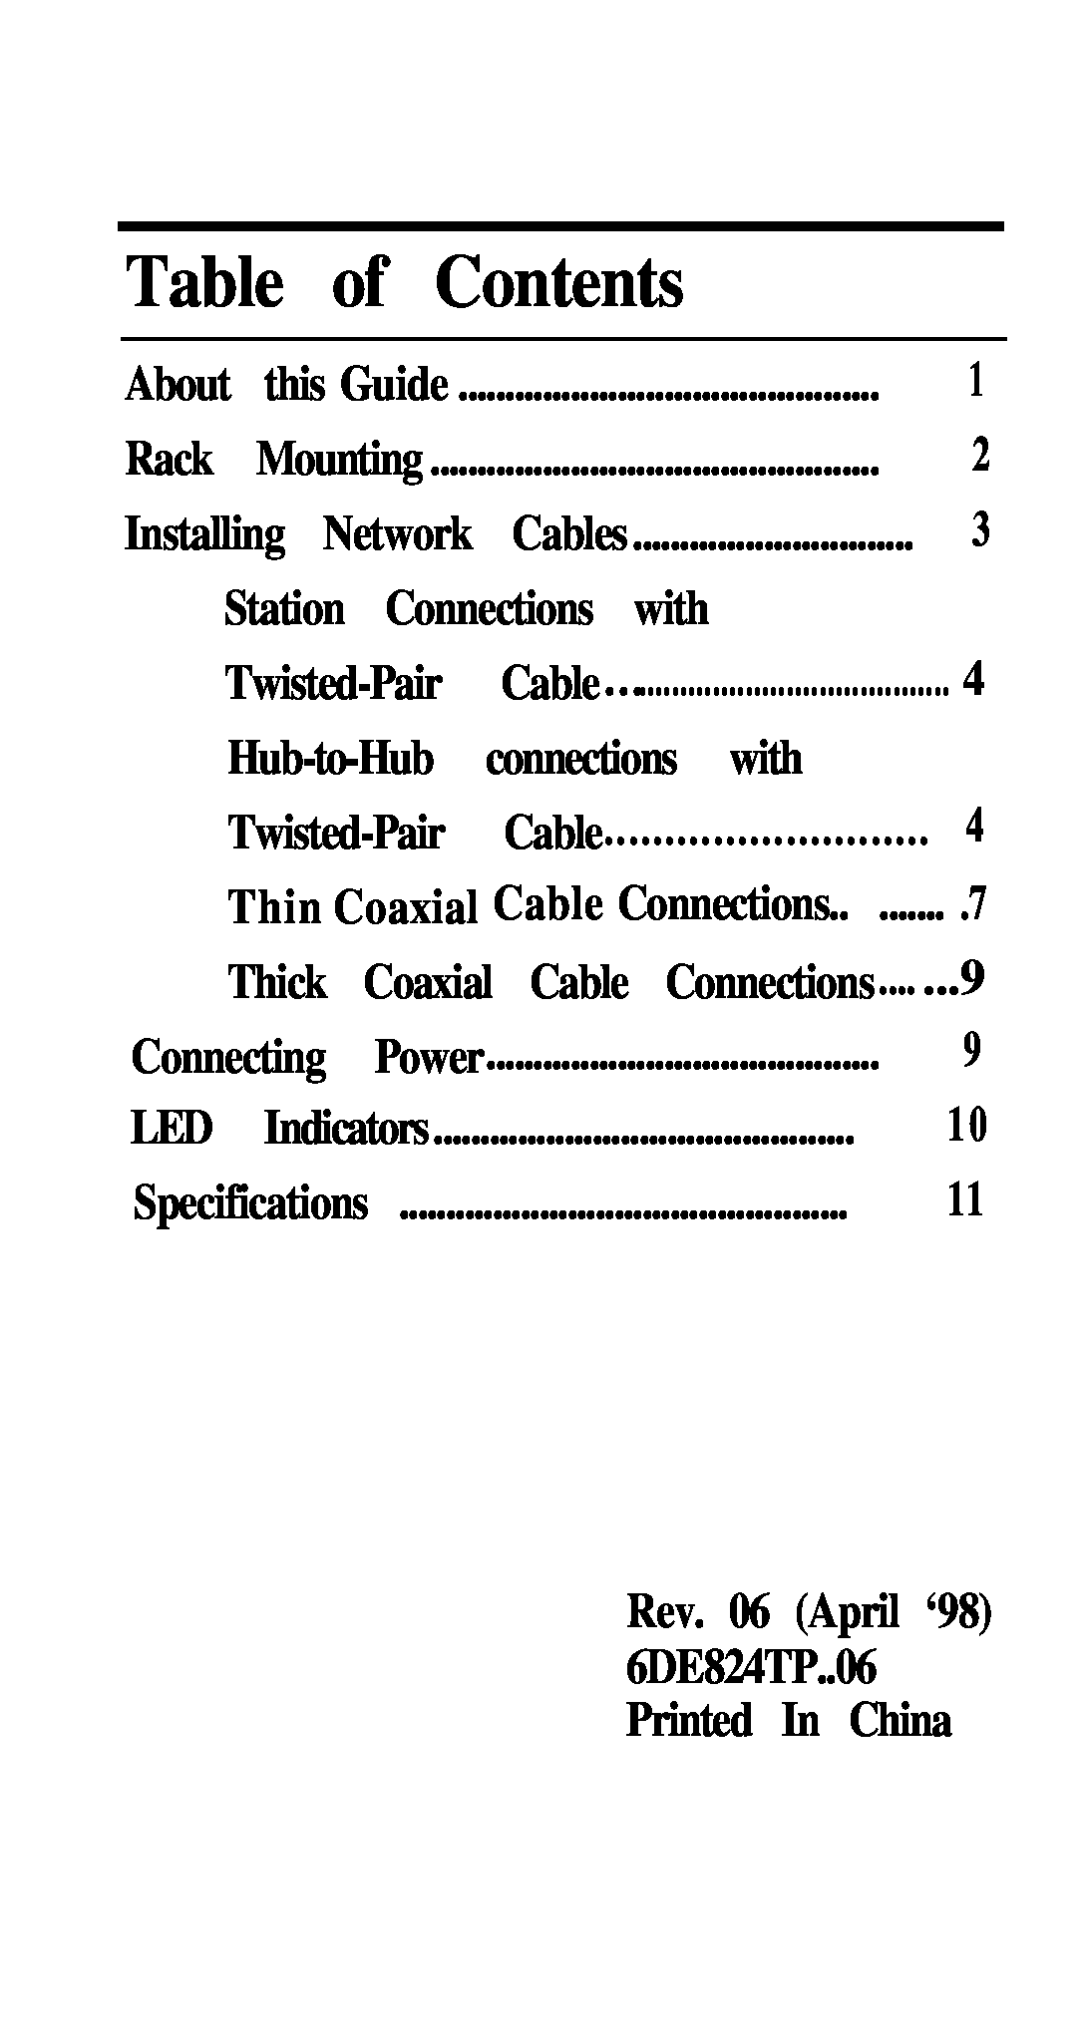 D-Link DE-824TP manual of Contents, About, Rack, Installing, Twisted-Pair, Hub-to-Hub connections with, Thick, Cable 